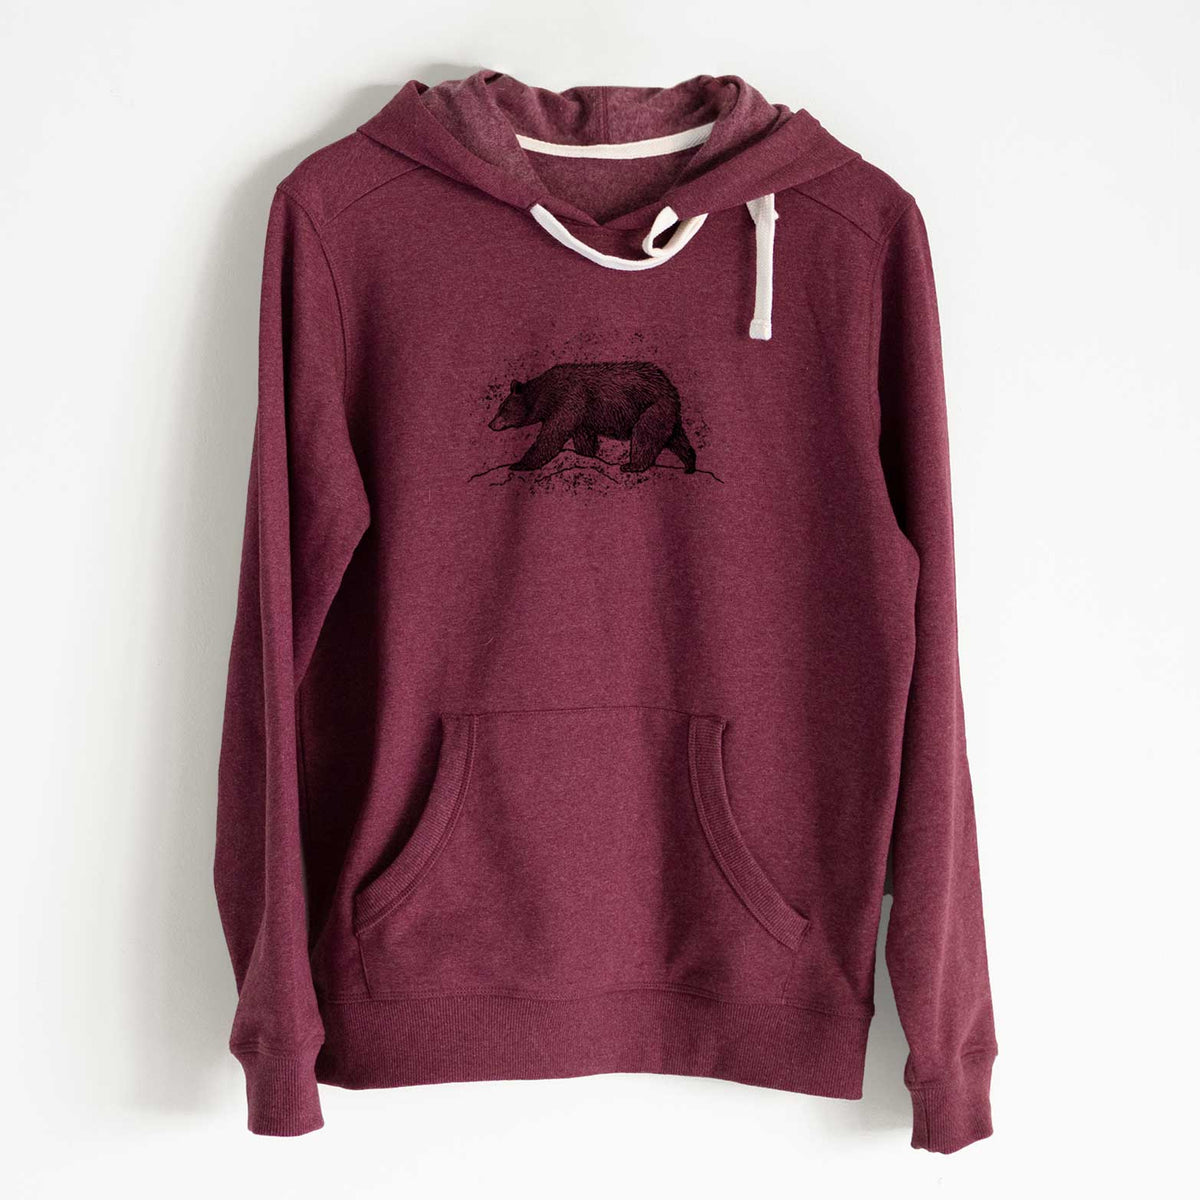 Black Bear - Unisex Recycled Hoodie - CLOSEOUT - FINAL SALE